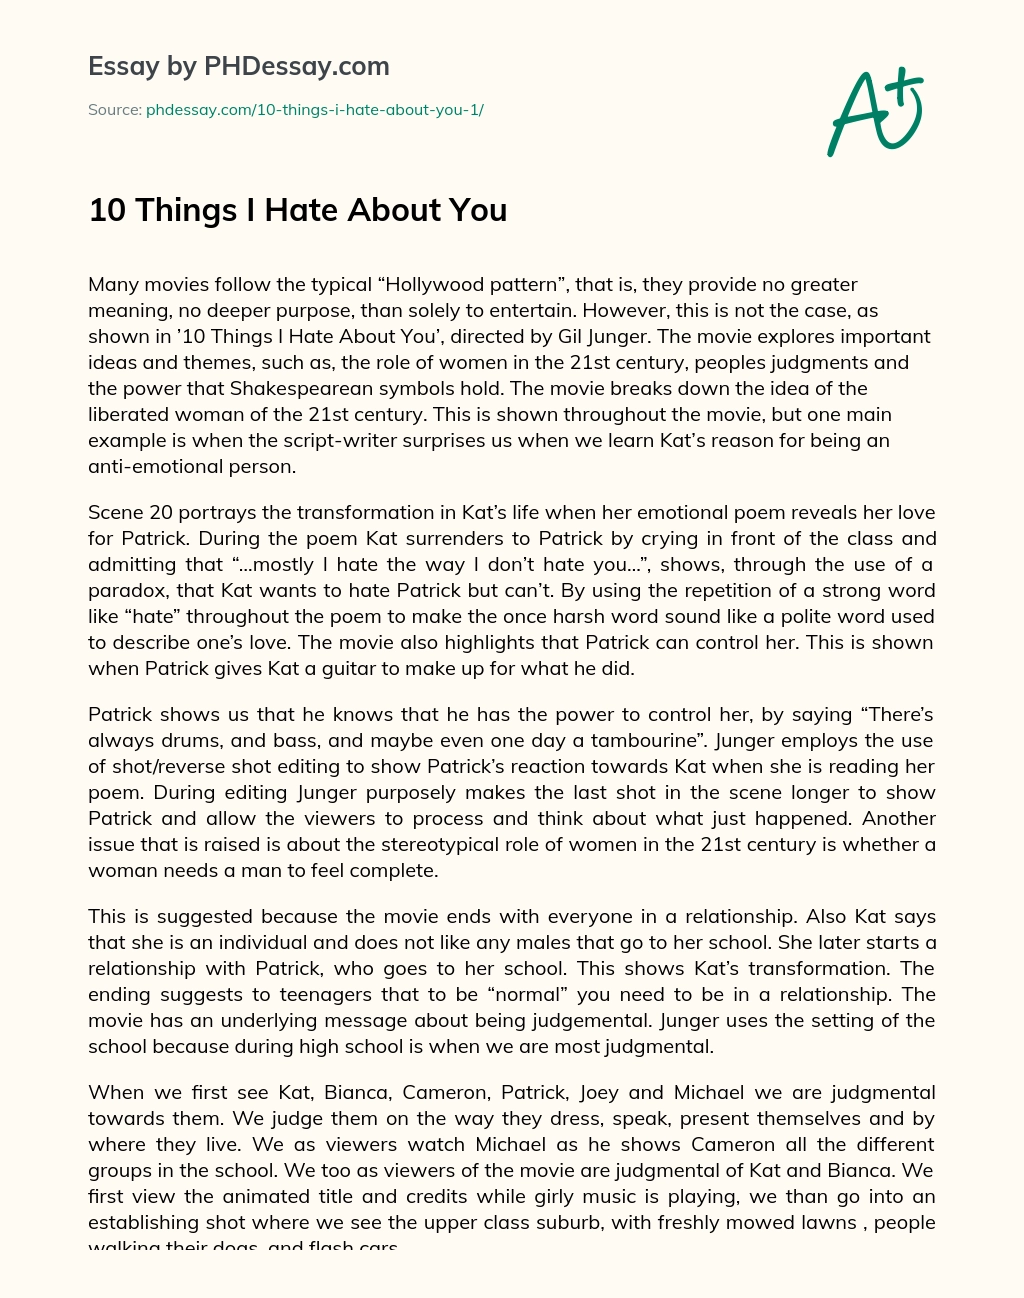 10 Things I Hate About You essay